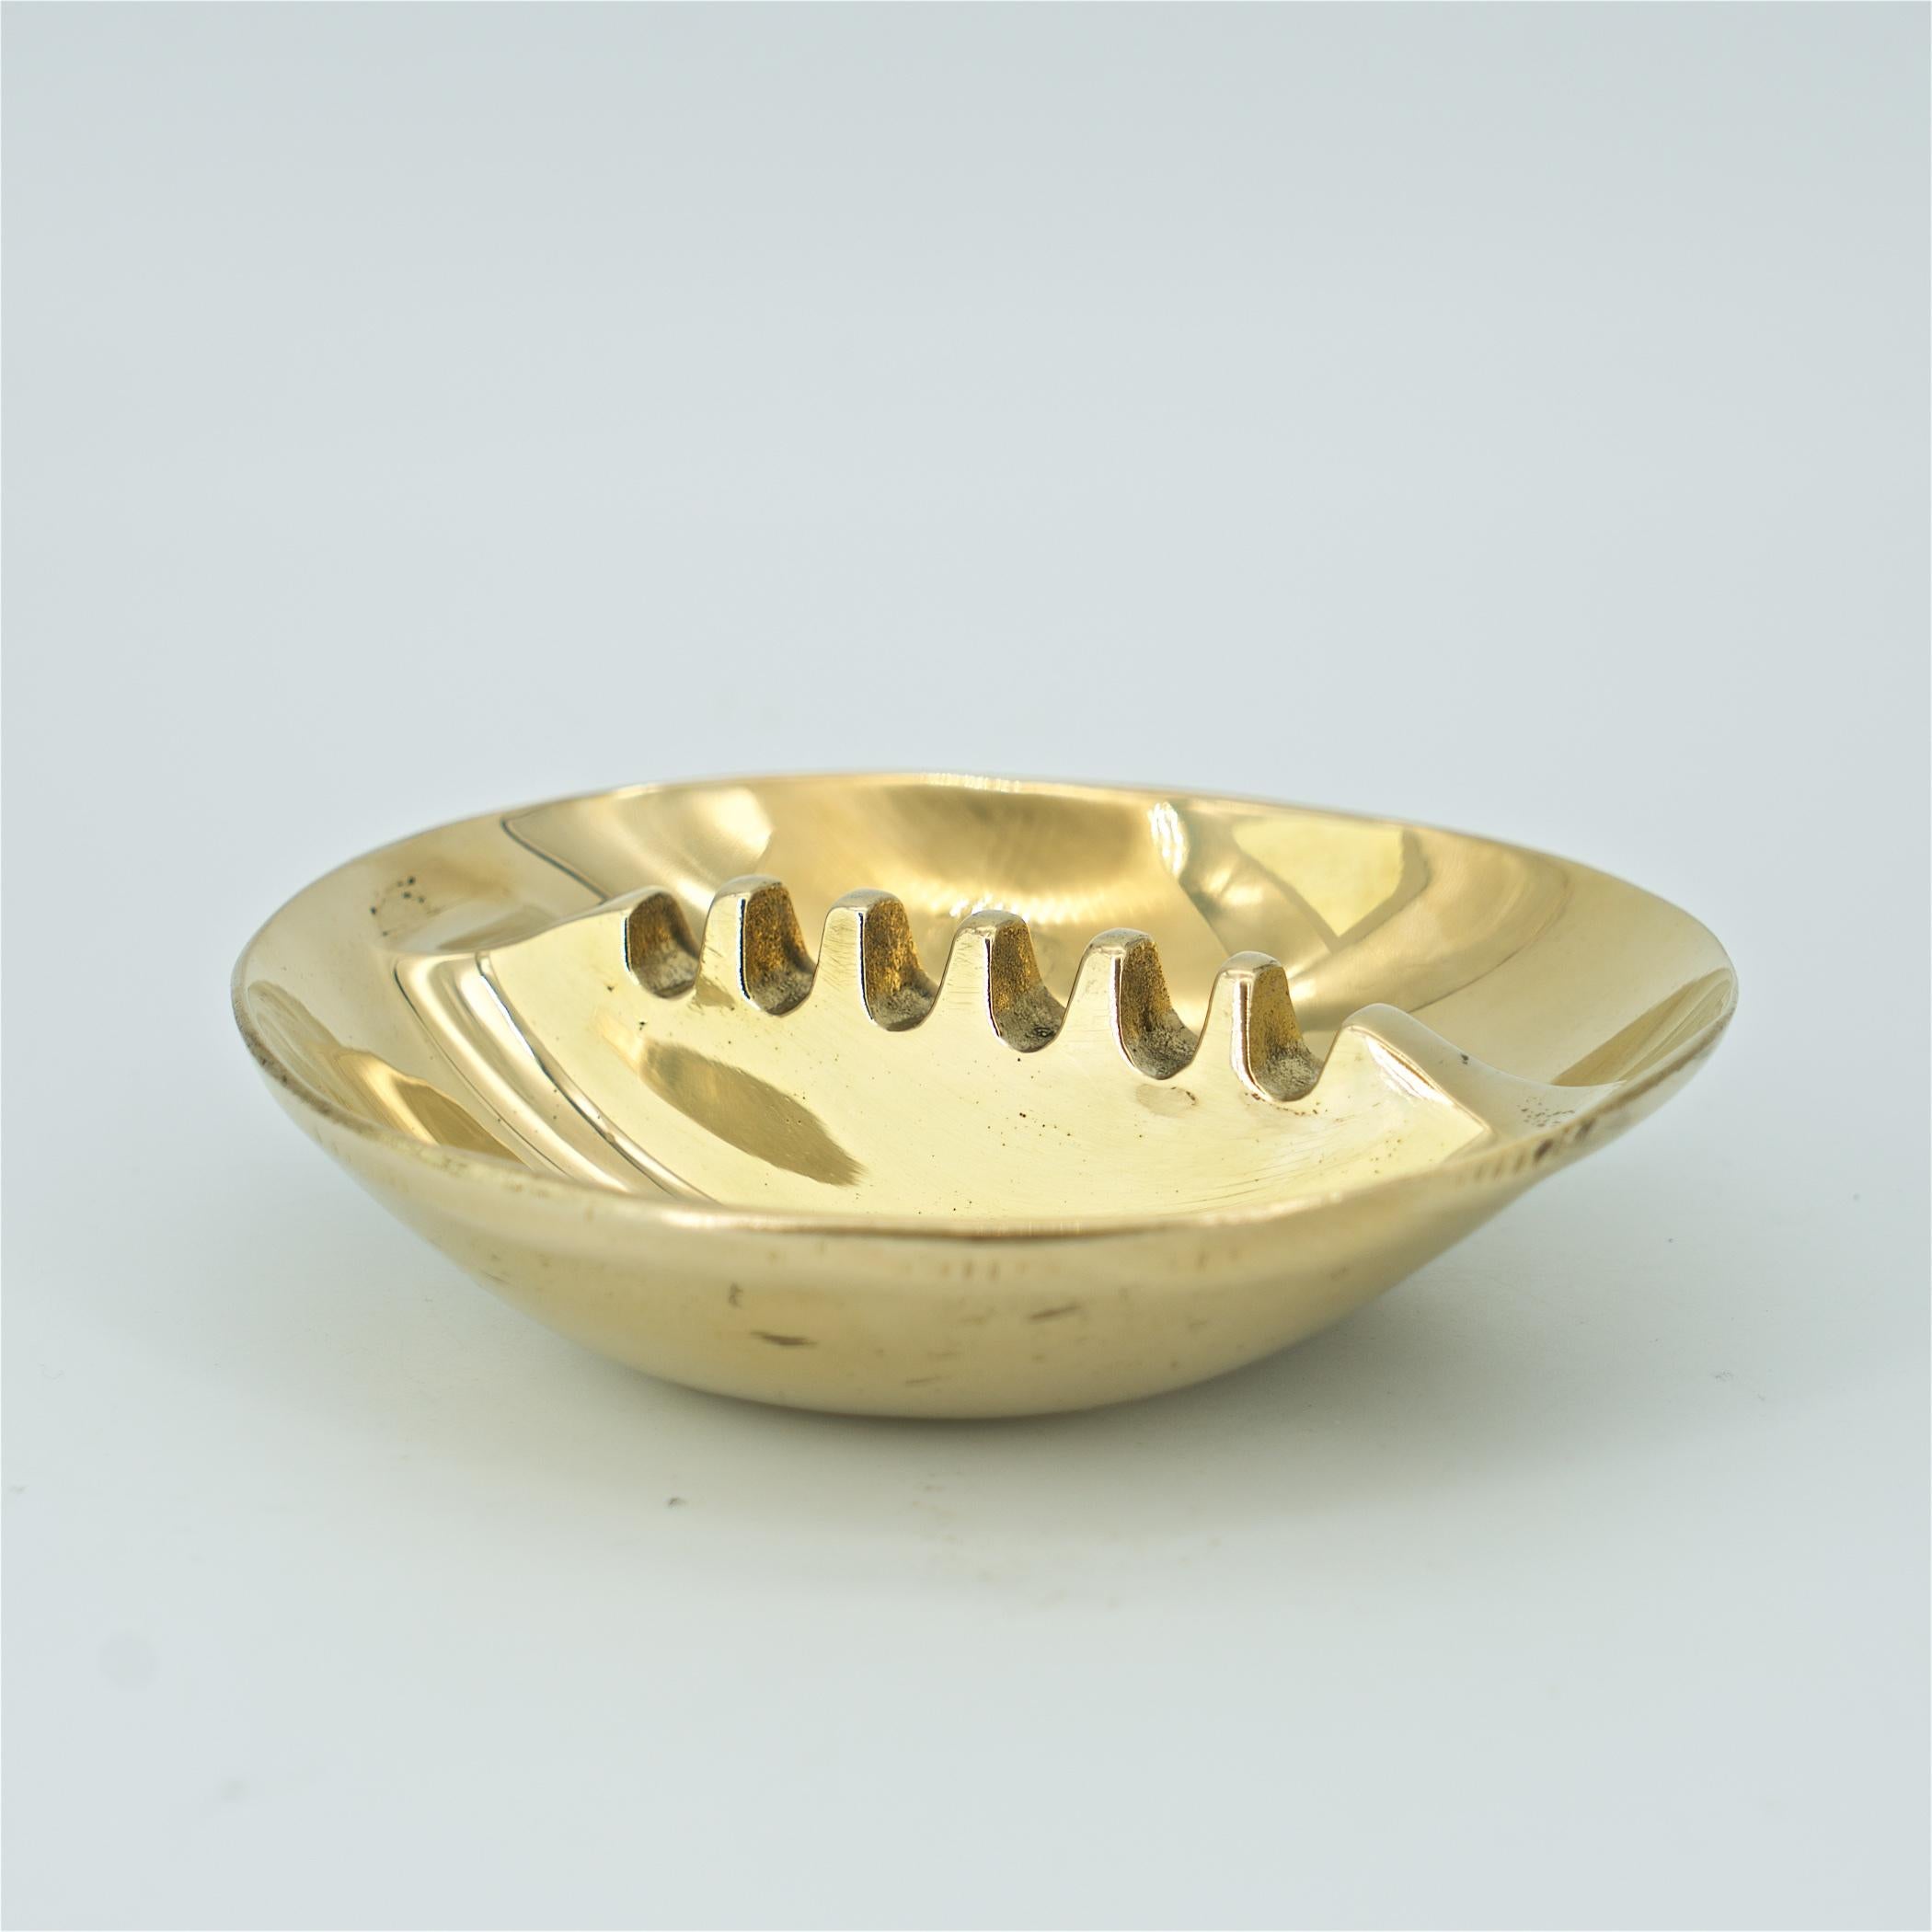 1970s Polished Gold Tone Ashtray Table Sculpture Mid-Century American Design In Good Condition In Hyattsville, MD